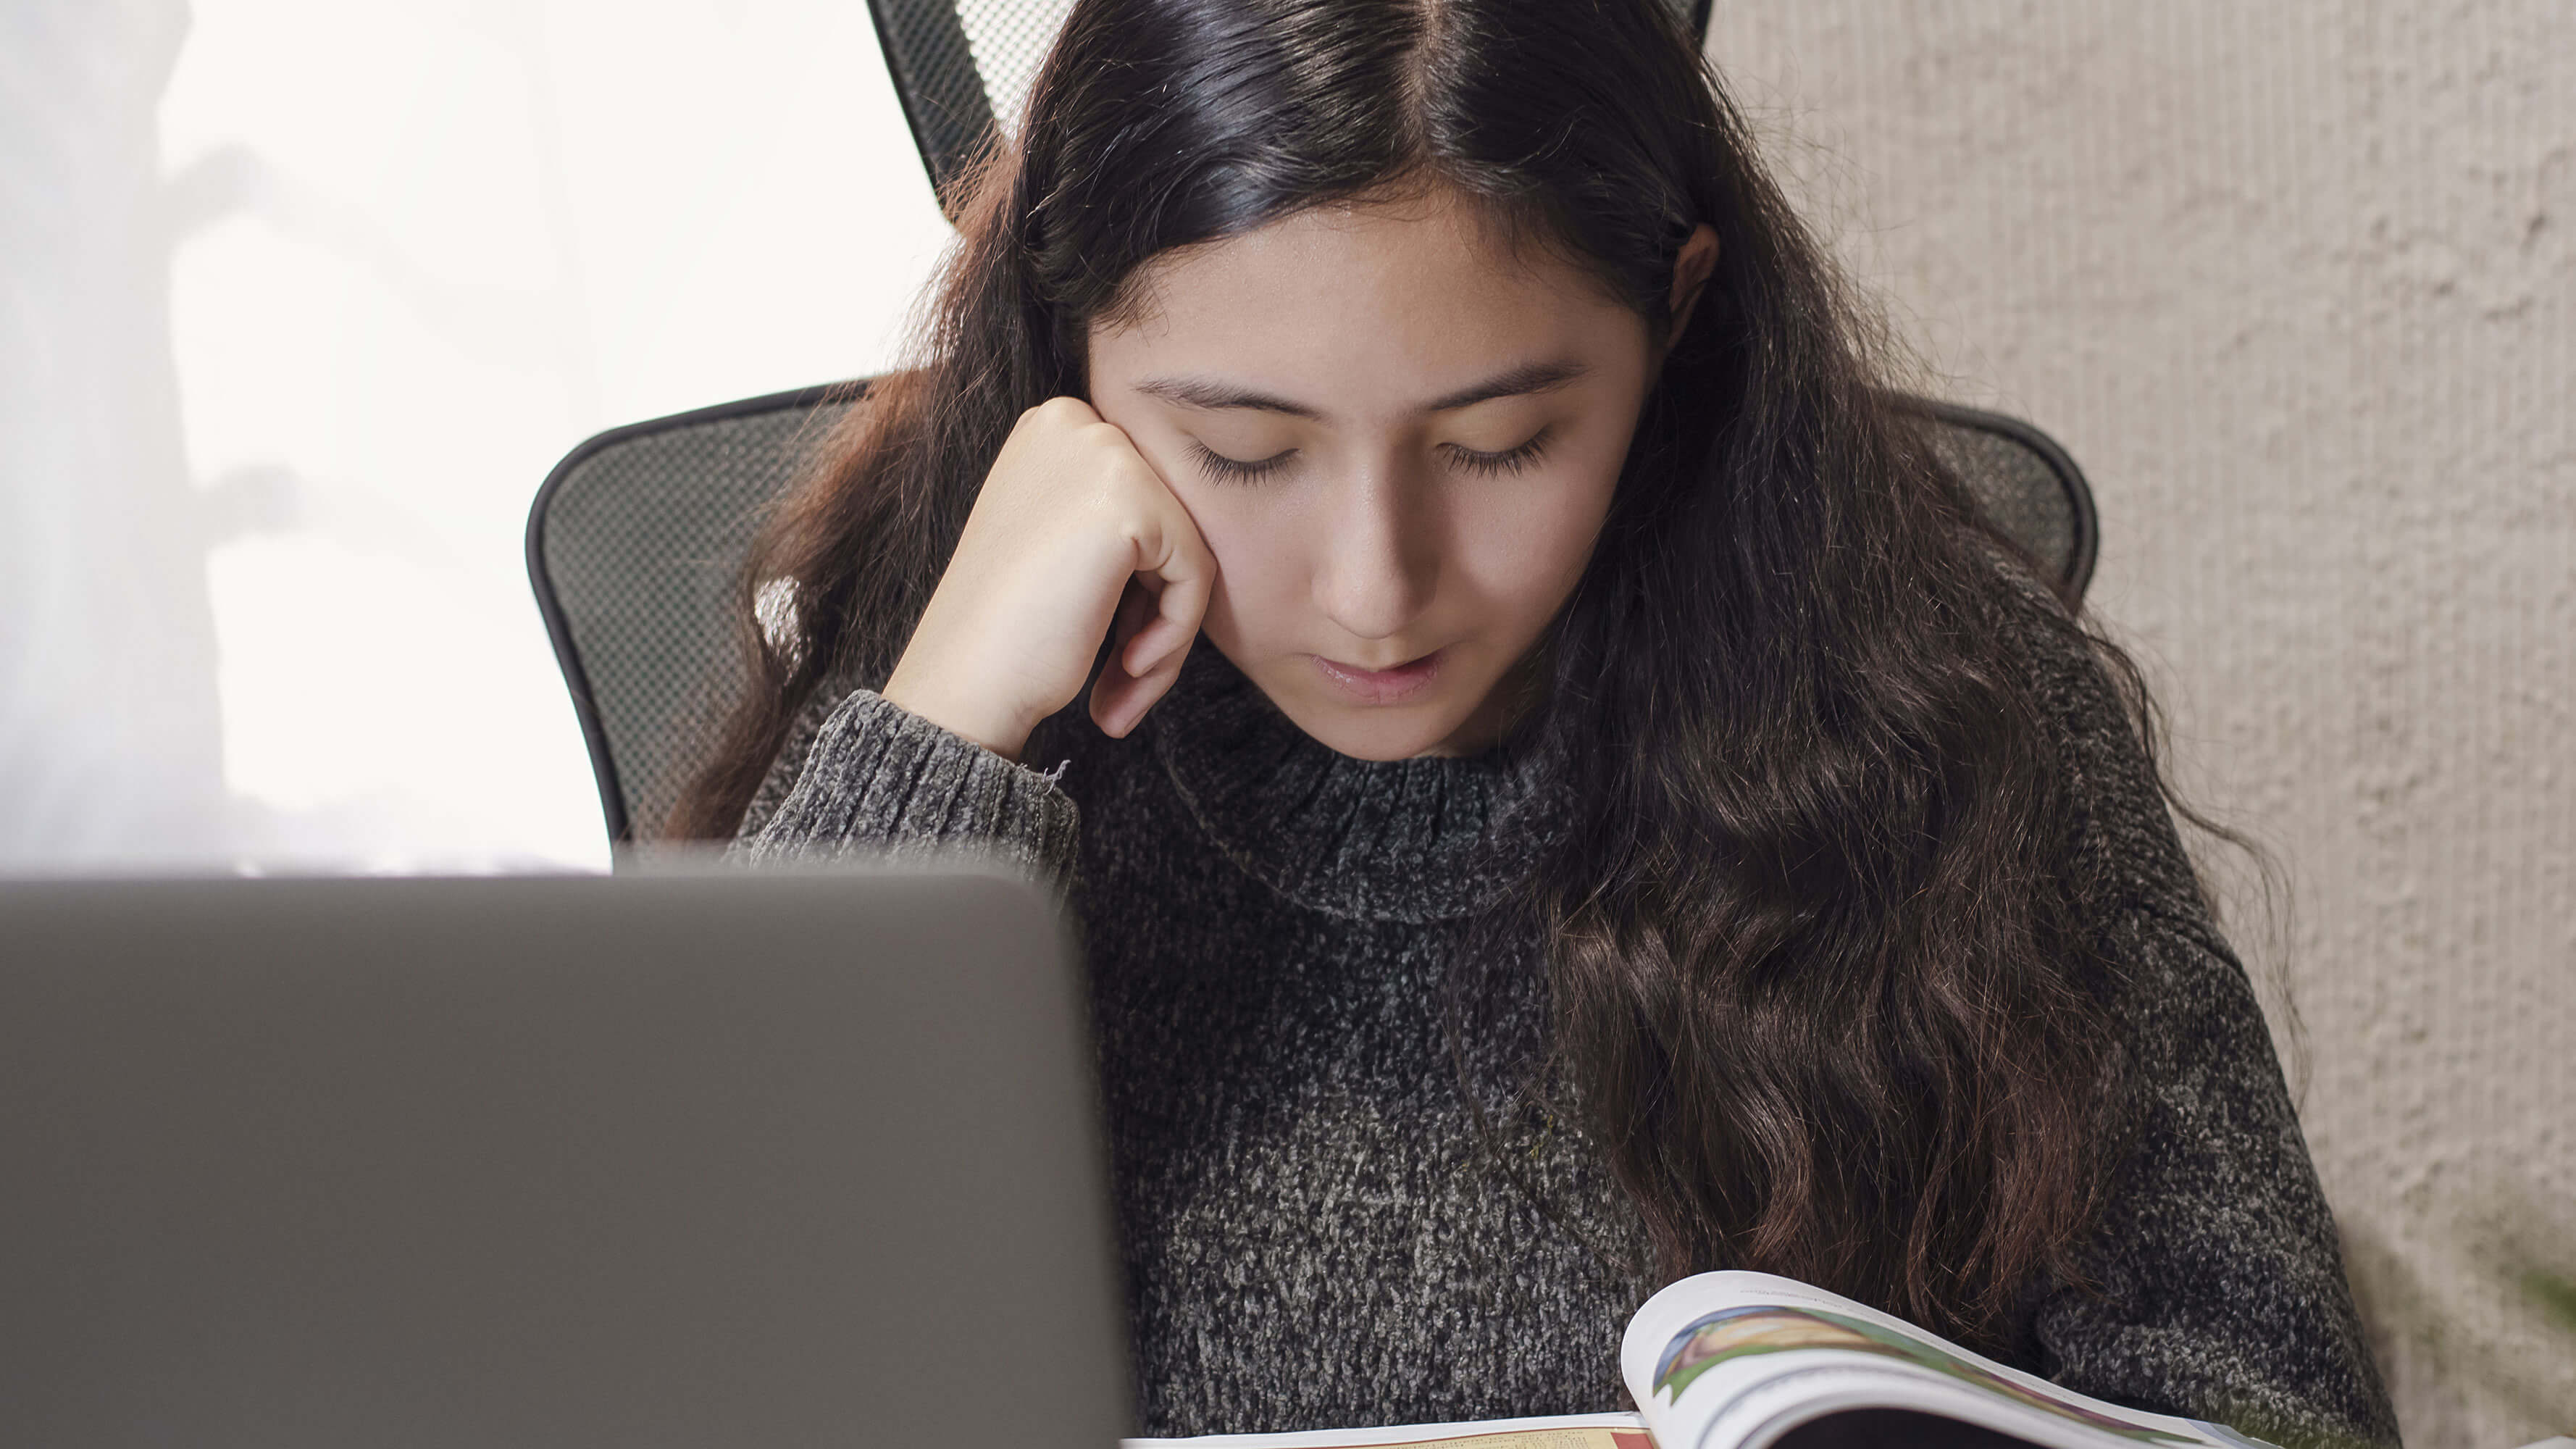 A girl in a grey sweater reads a book in front of her laptop while resting her cheek on her hand.